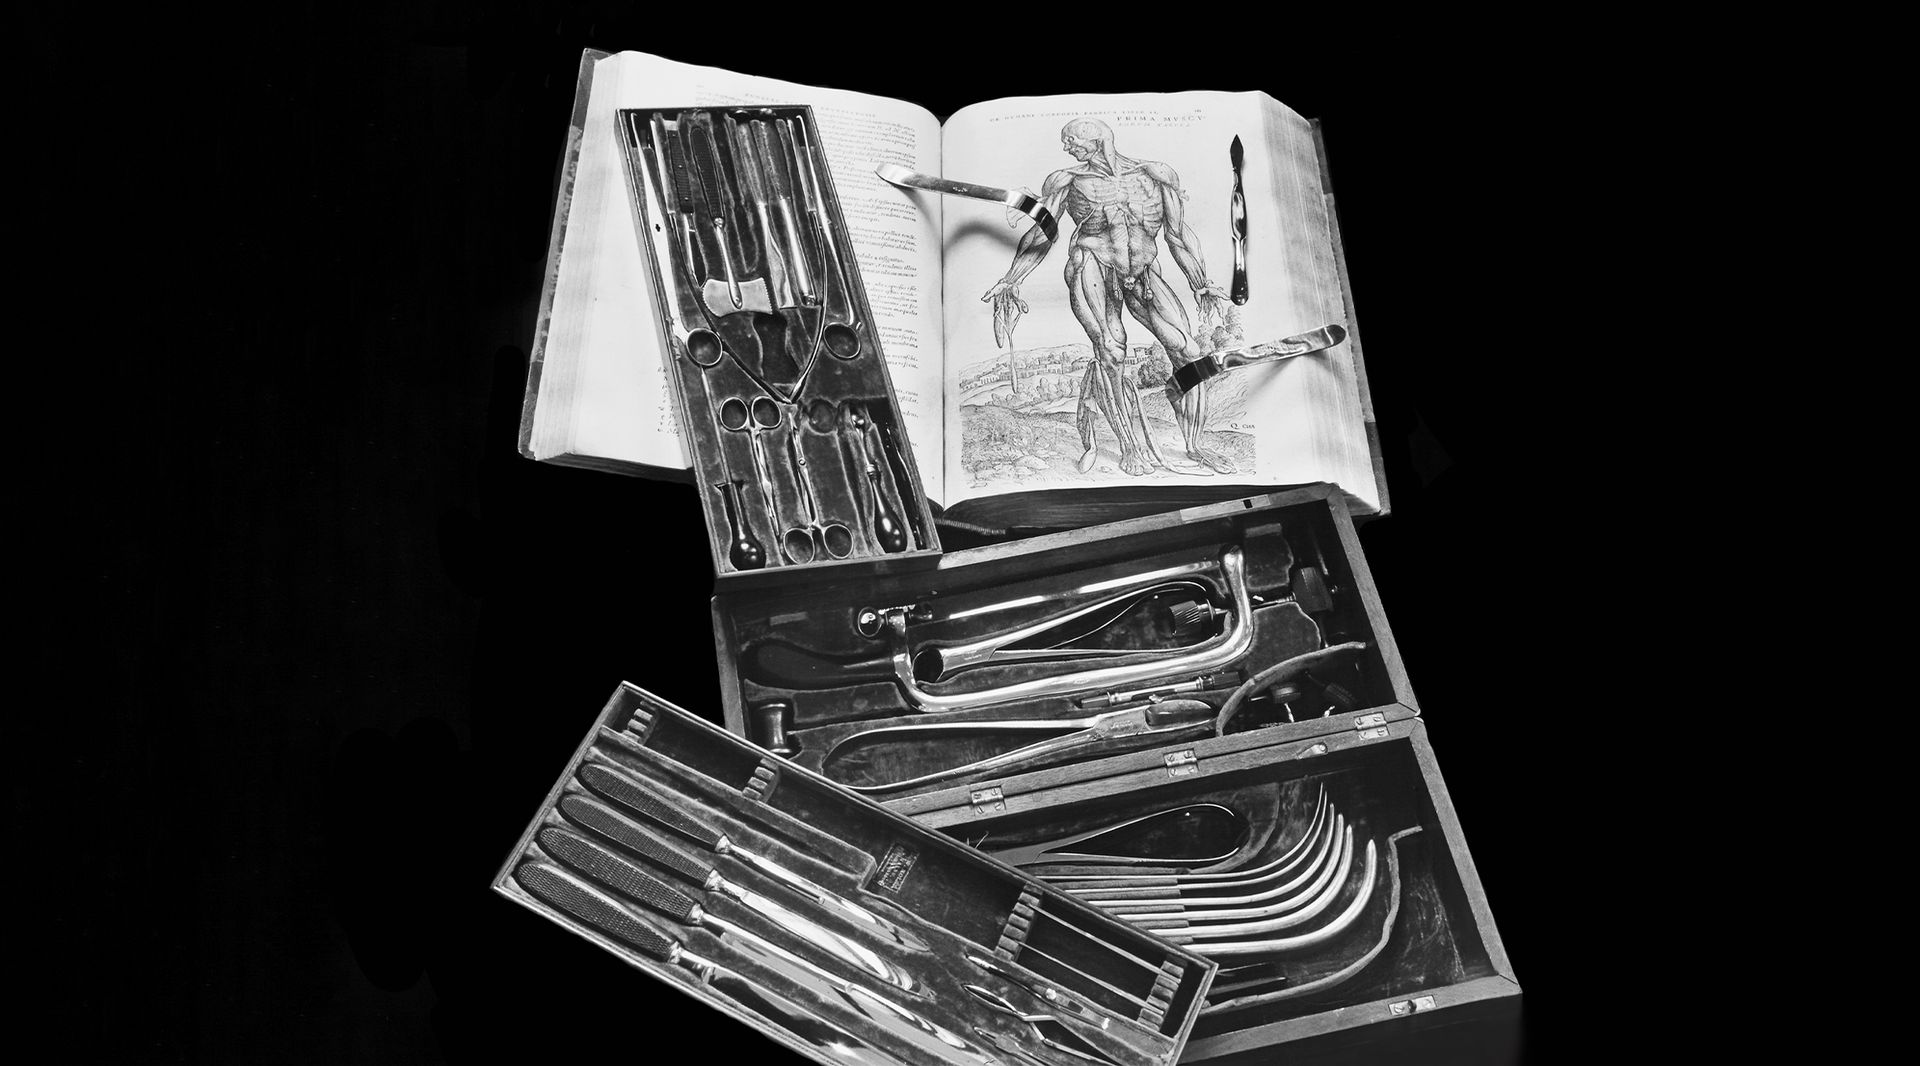 Black and white photo of anatomical book and medical tools